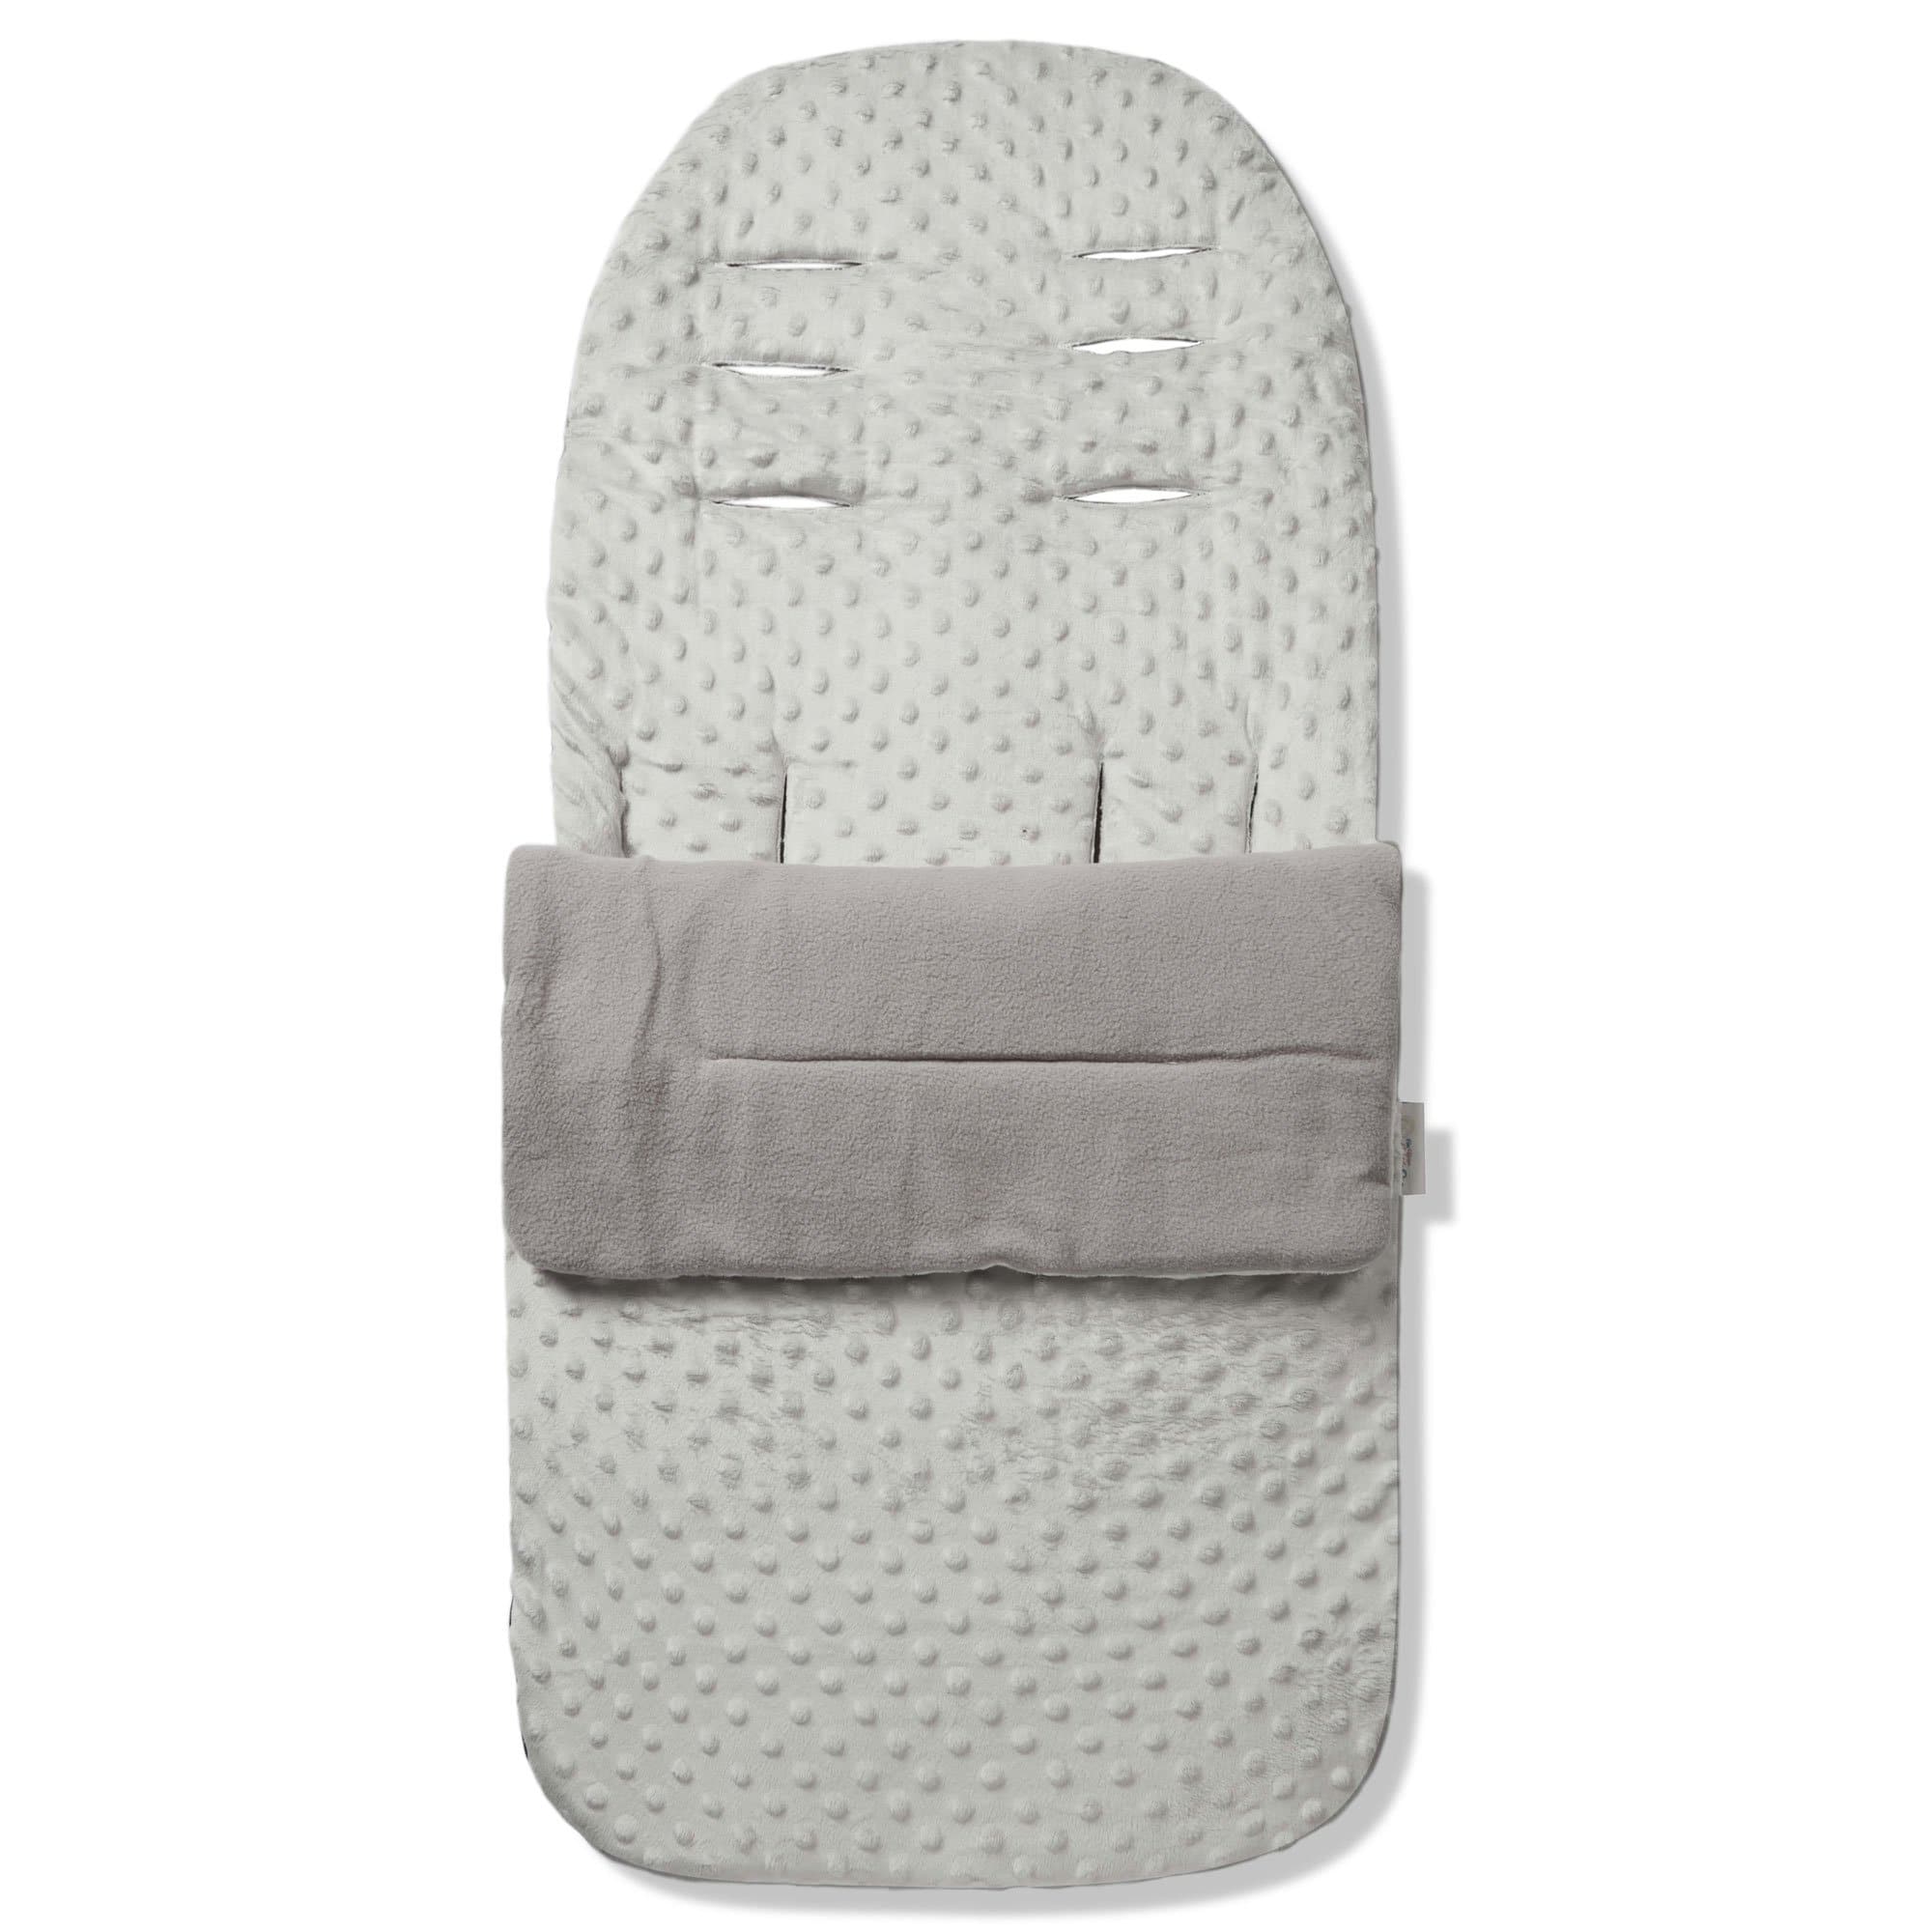 Dimple Footmuff / Cosy Toes Compatible with Concord - For Your Little One